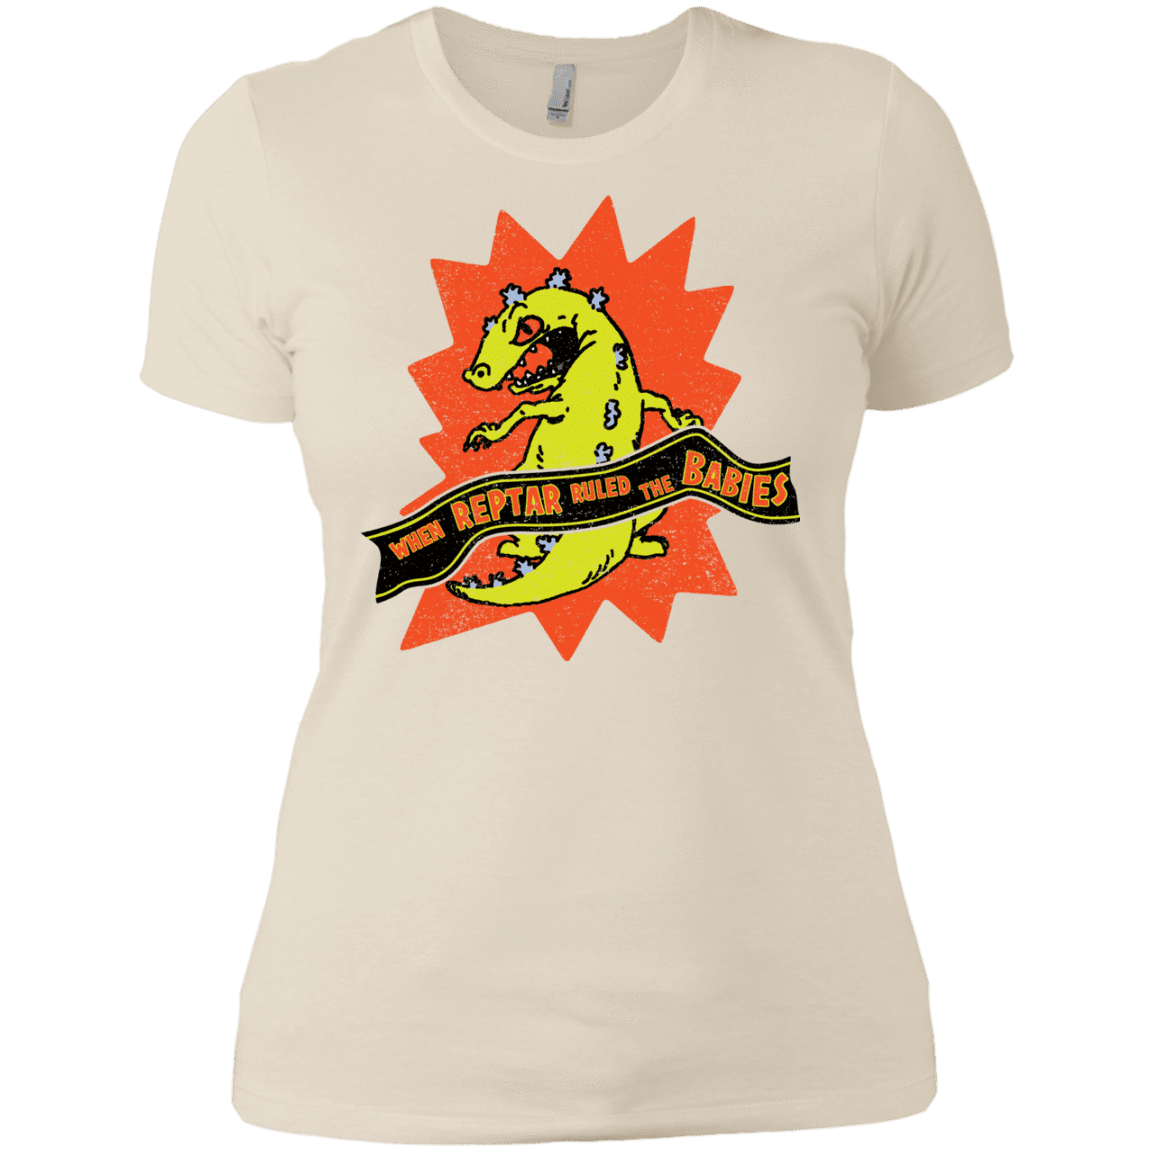 T-Shirts Ivory/ / X-Small When Reptar Ruled The Babies Women's Premium T-Shirt